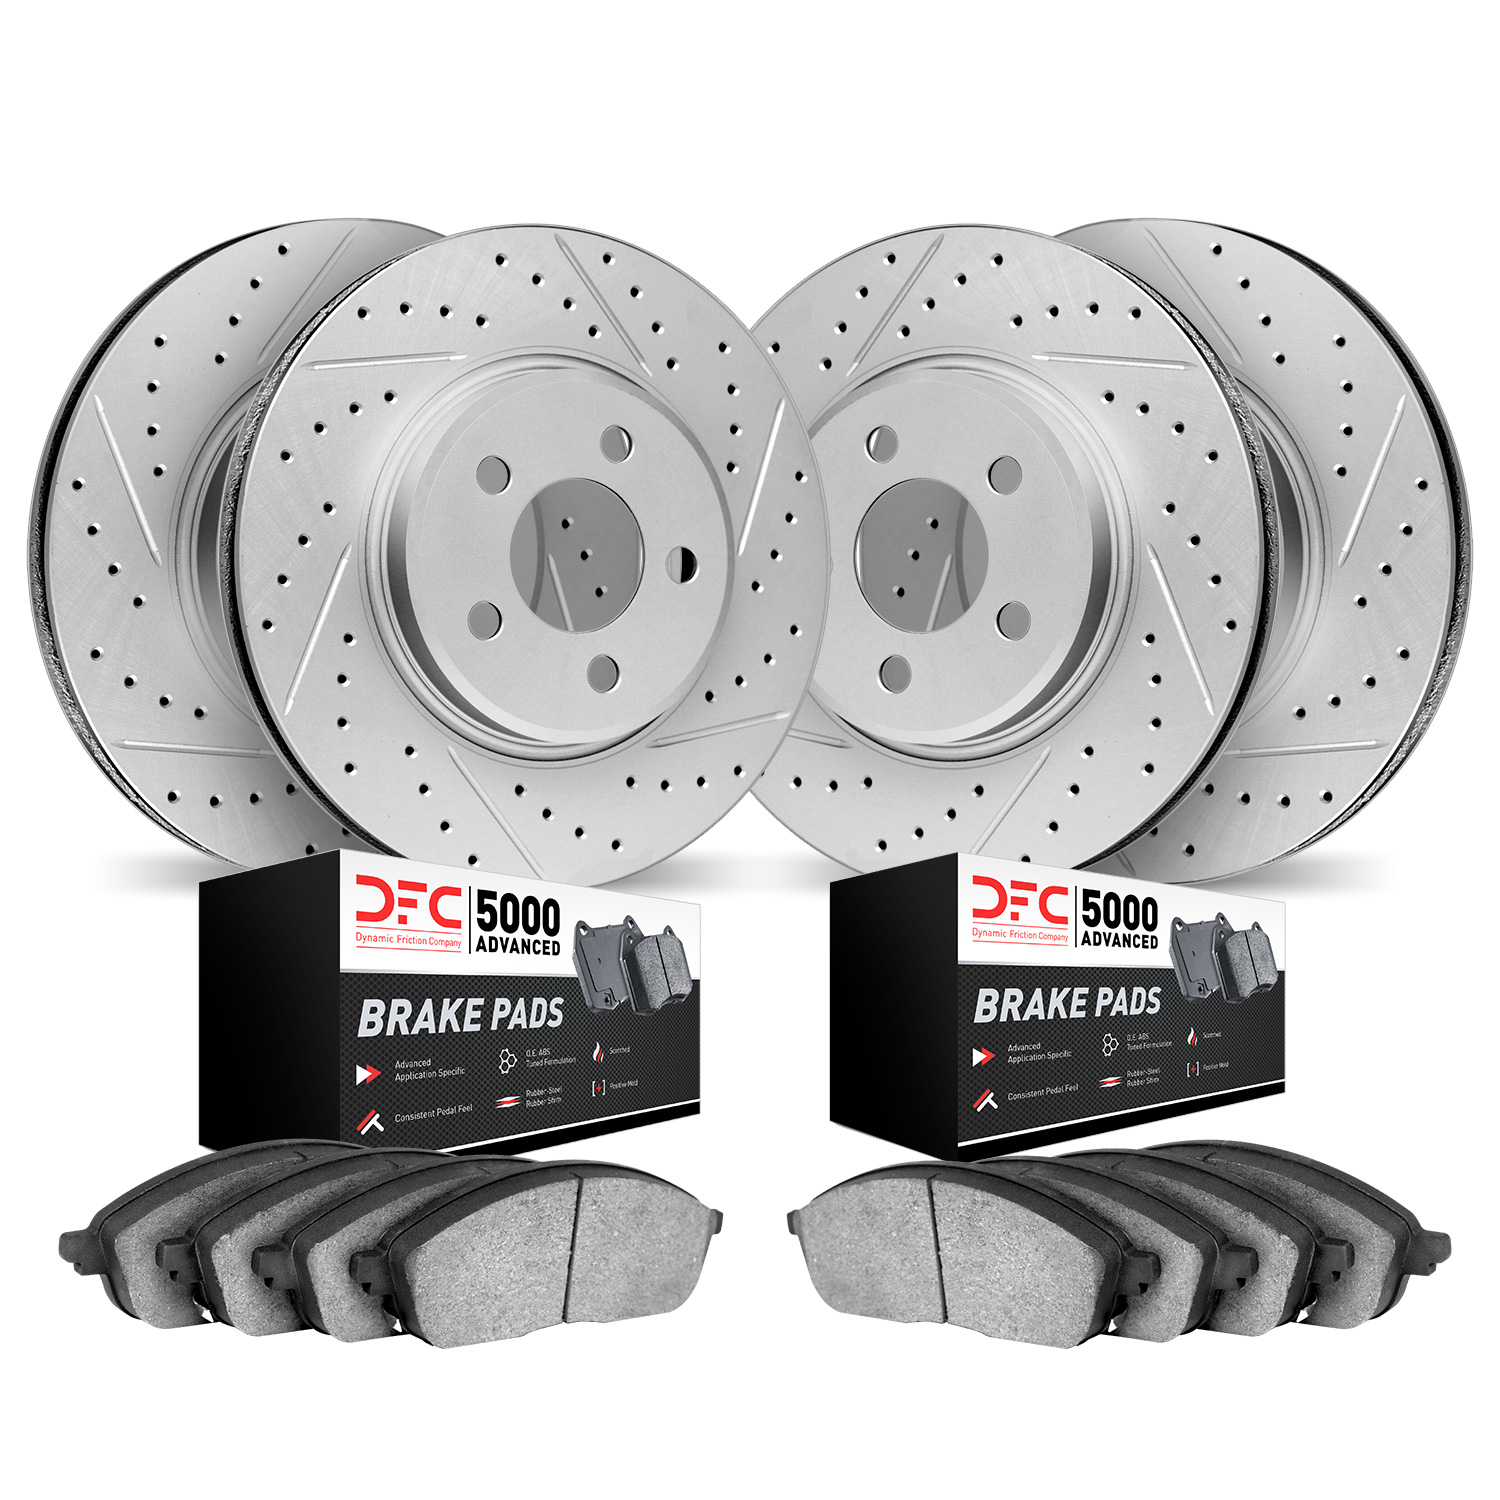 2504-74038 Geoperformance Drilled/Slotted Rotors w/5000 Advanced Brake Pads Kit, 2003-2015 Multiple Makes/Models, Position: Fron